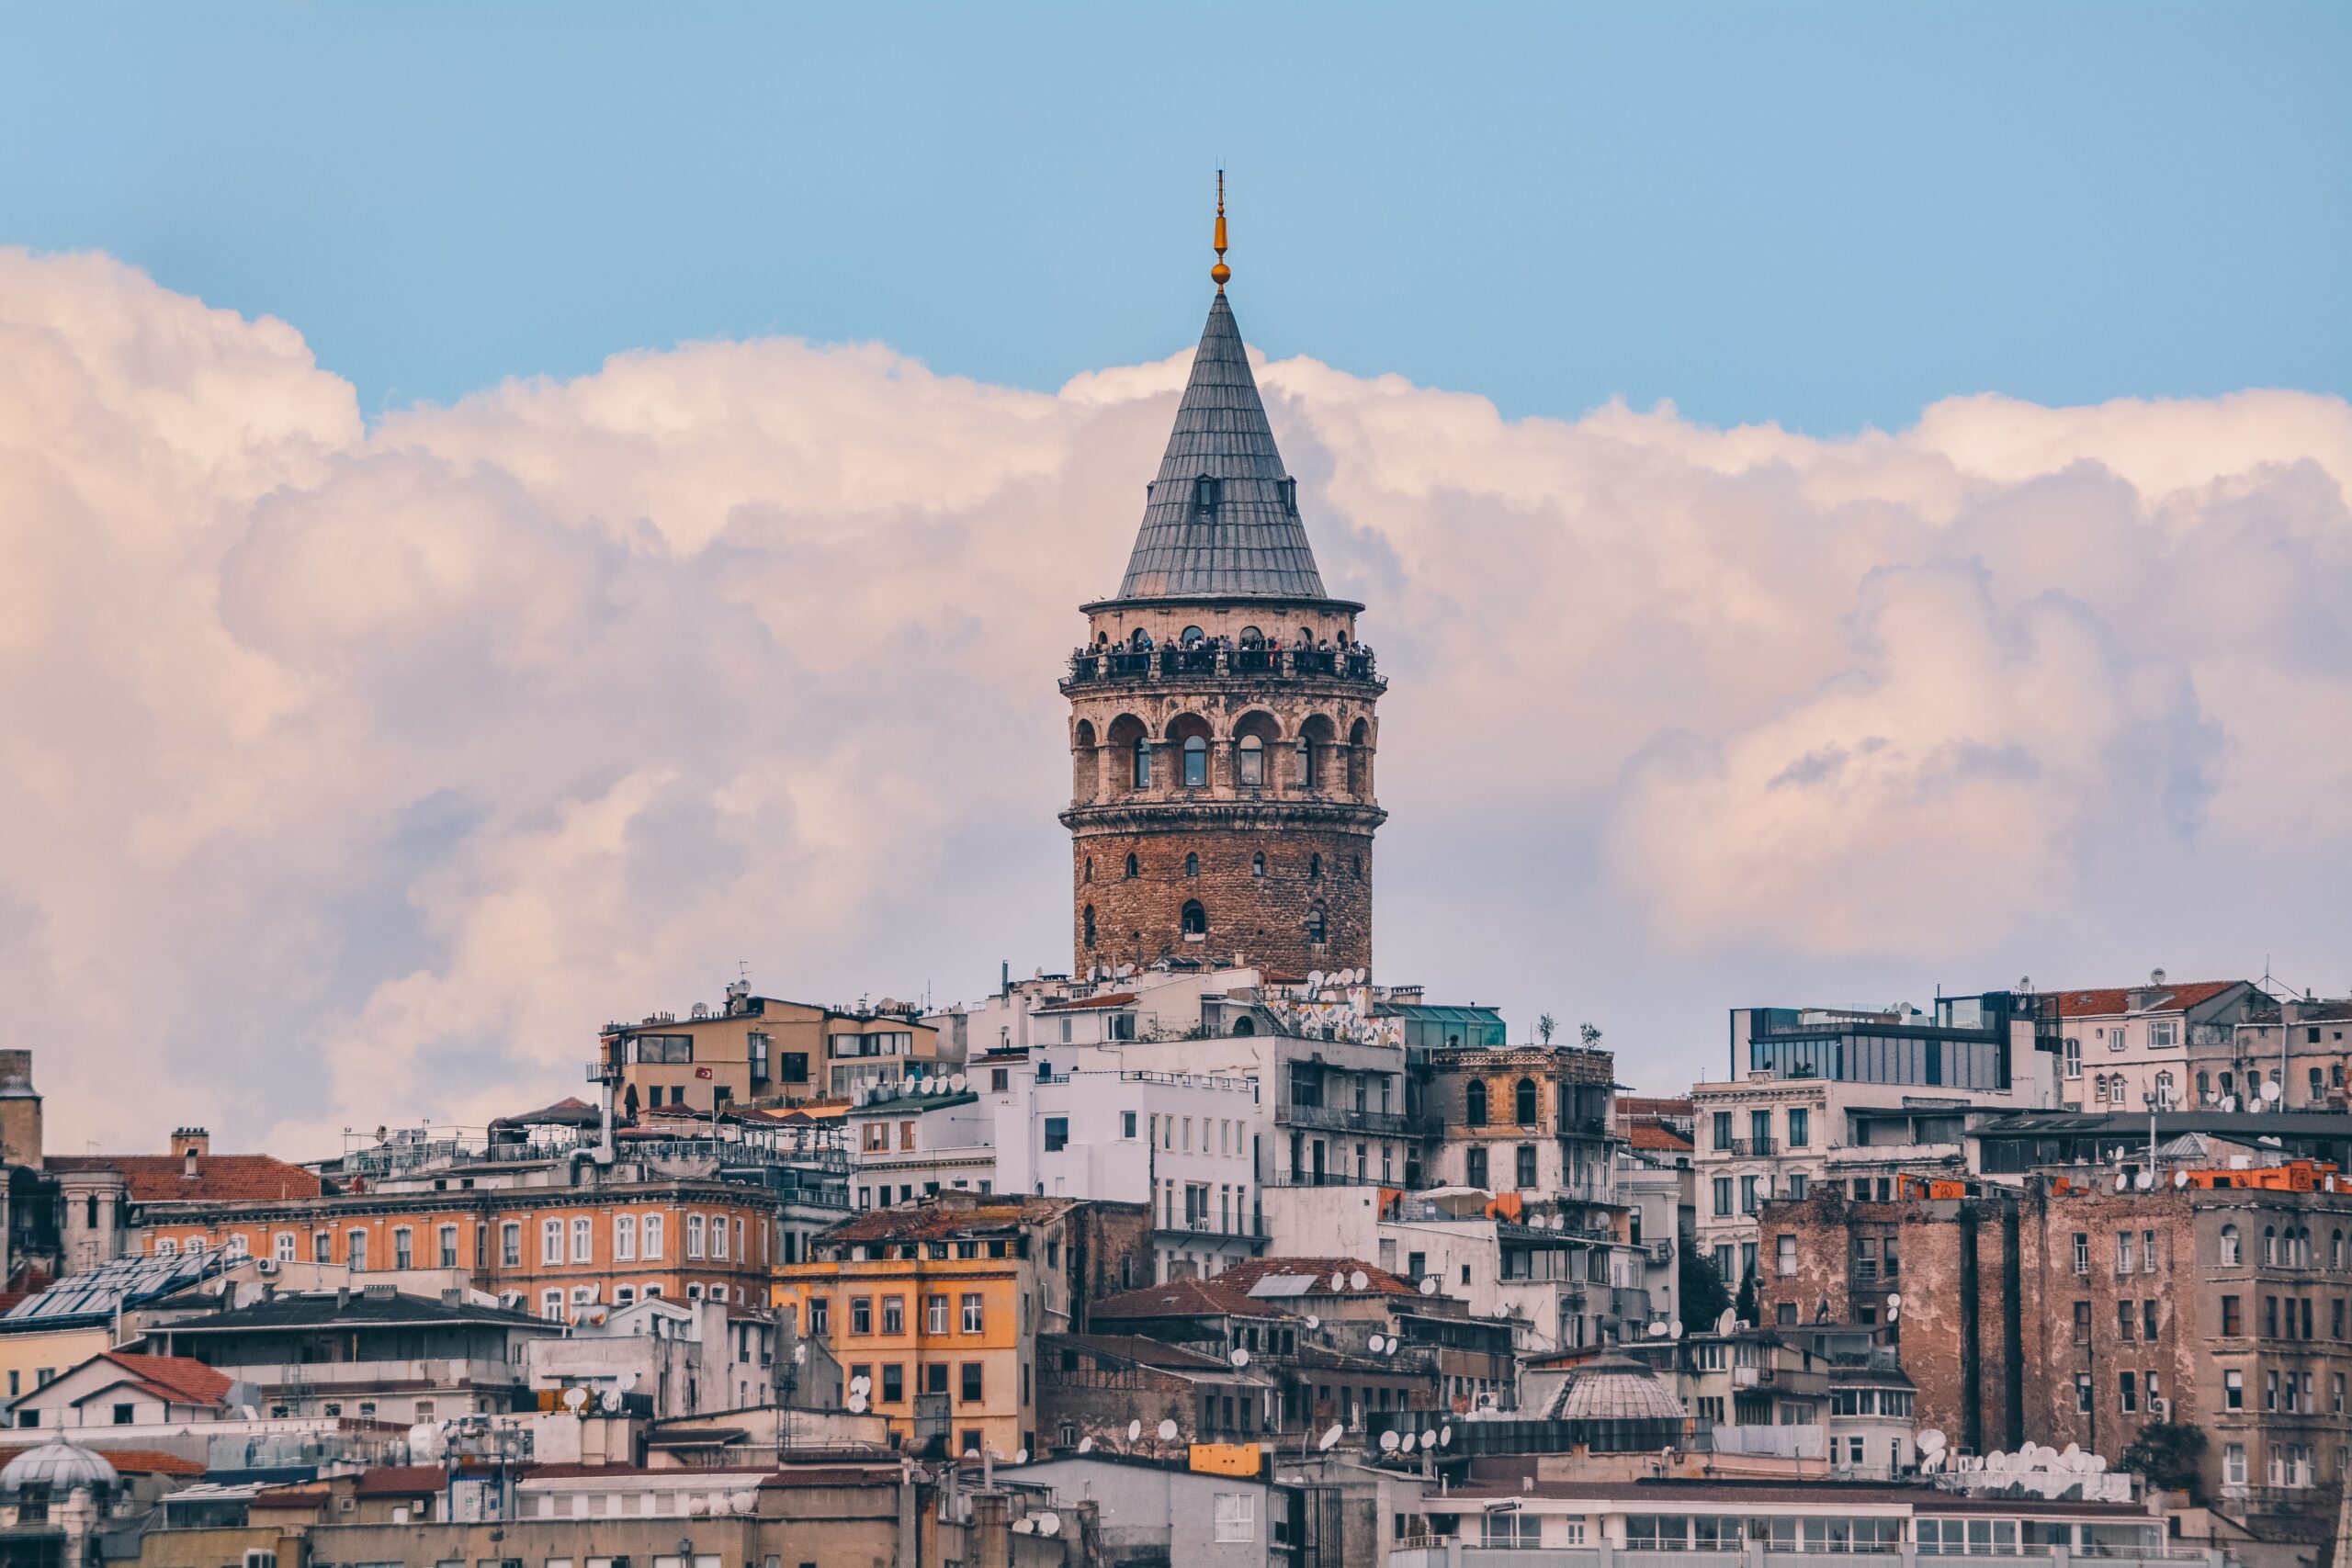 Thumbnail for How Do I Go To the Galata Tower?